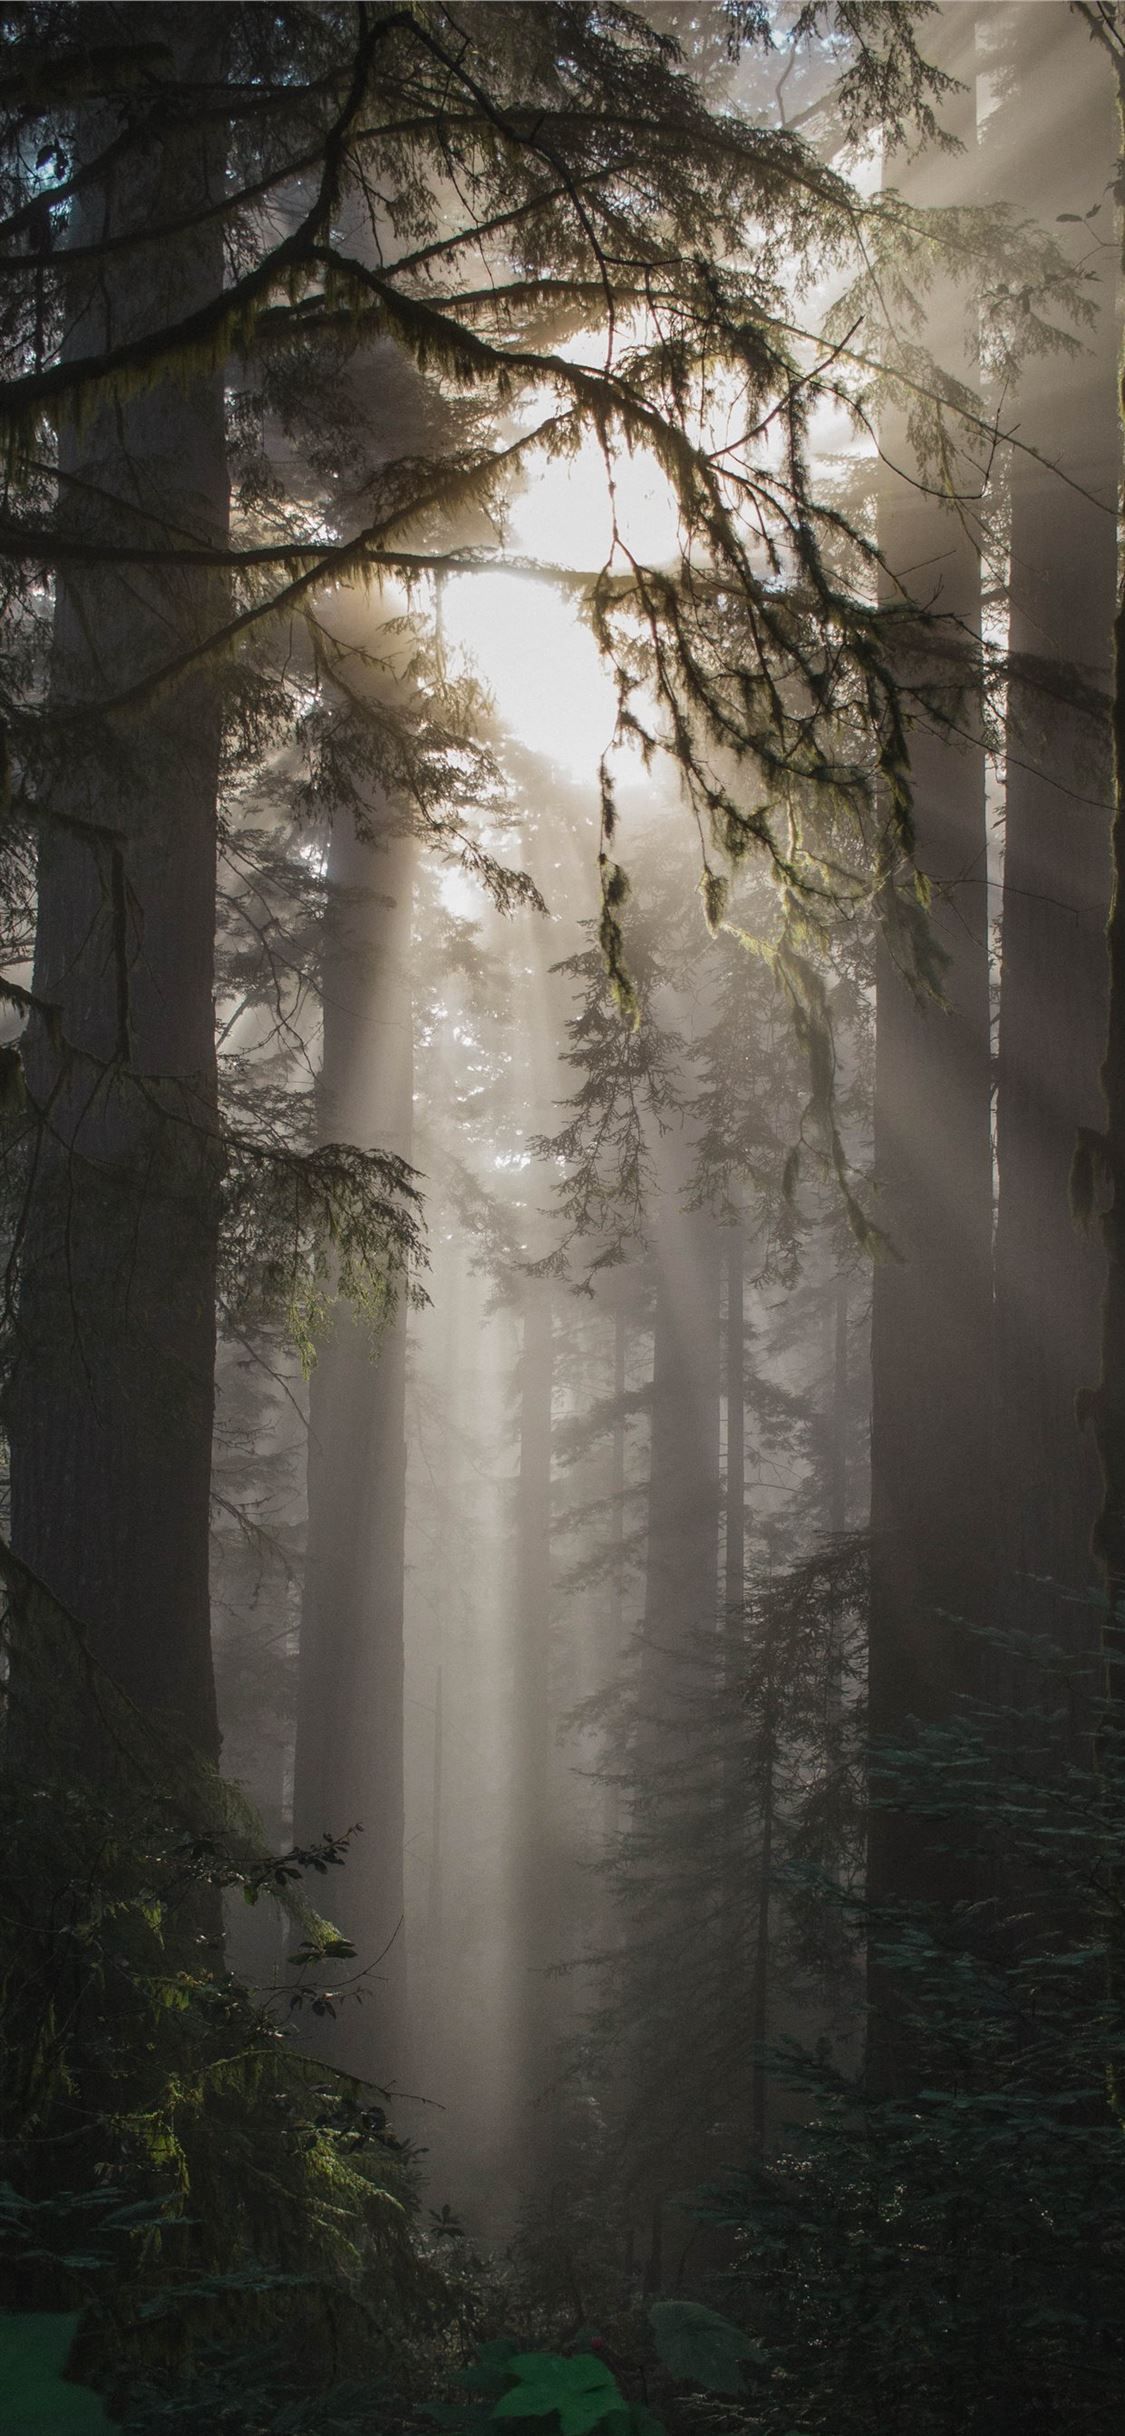 A sun shining through the trees in an area - Foggy forest